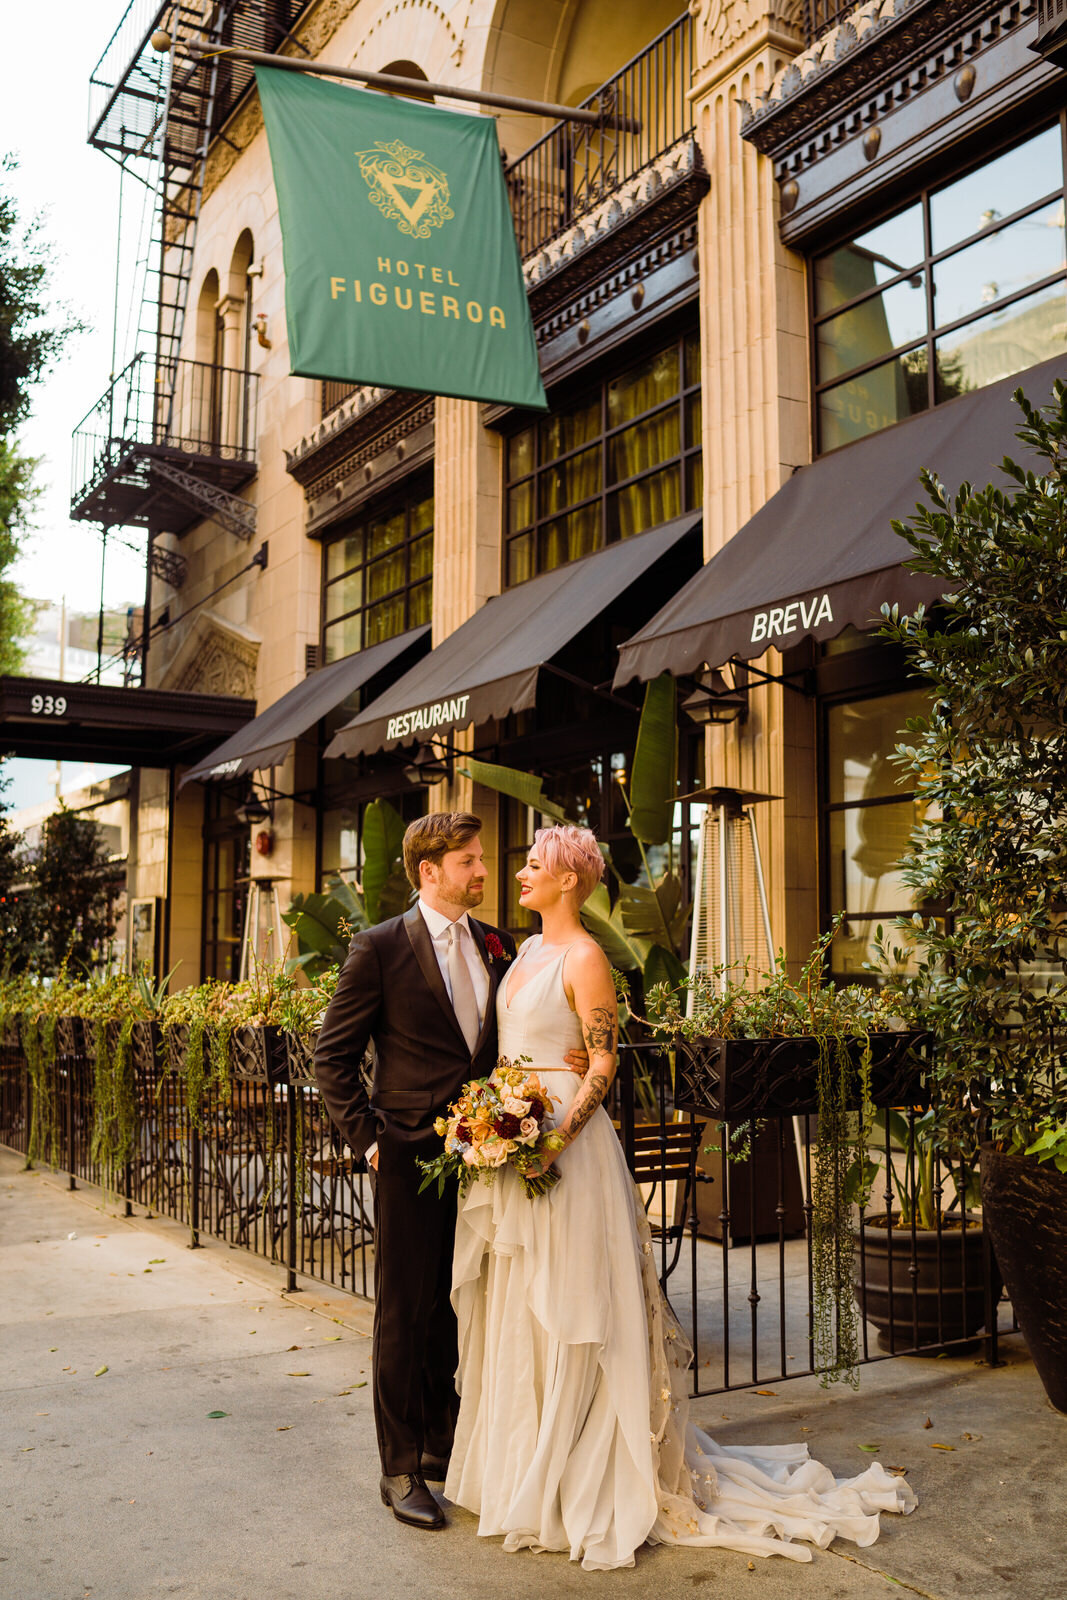 Newlywed photo in front of Hotel Figueroa facade at modern, feminist wedding